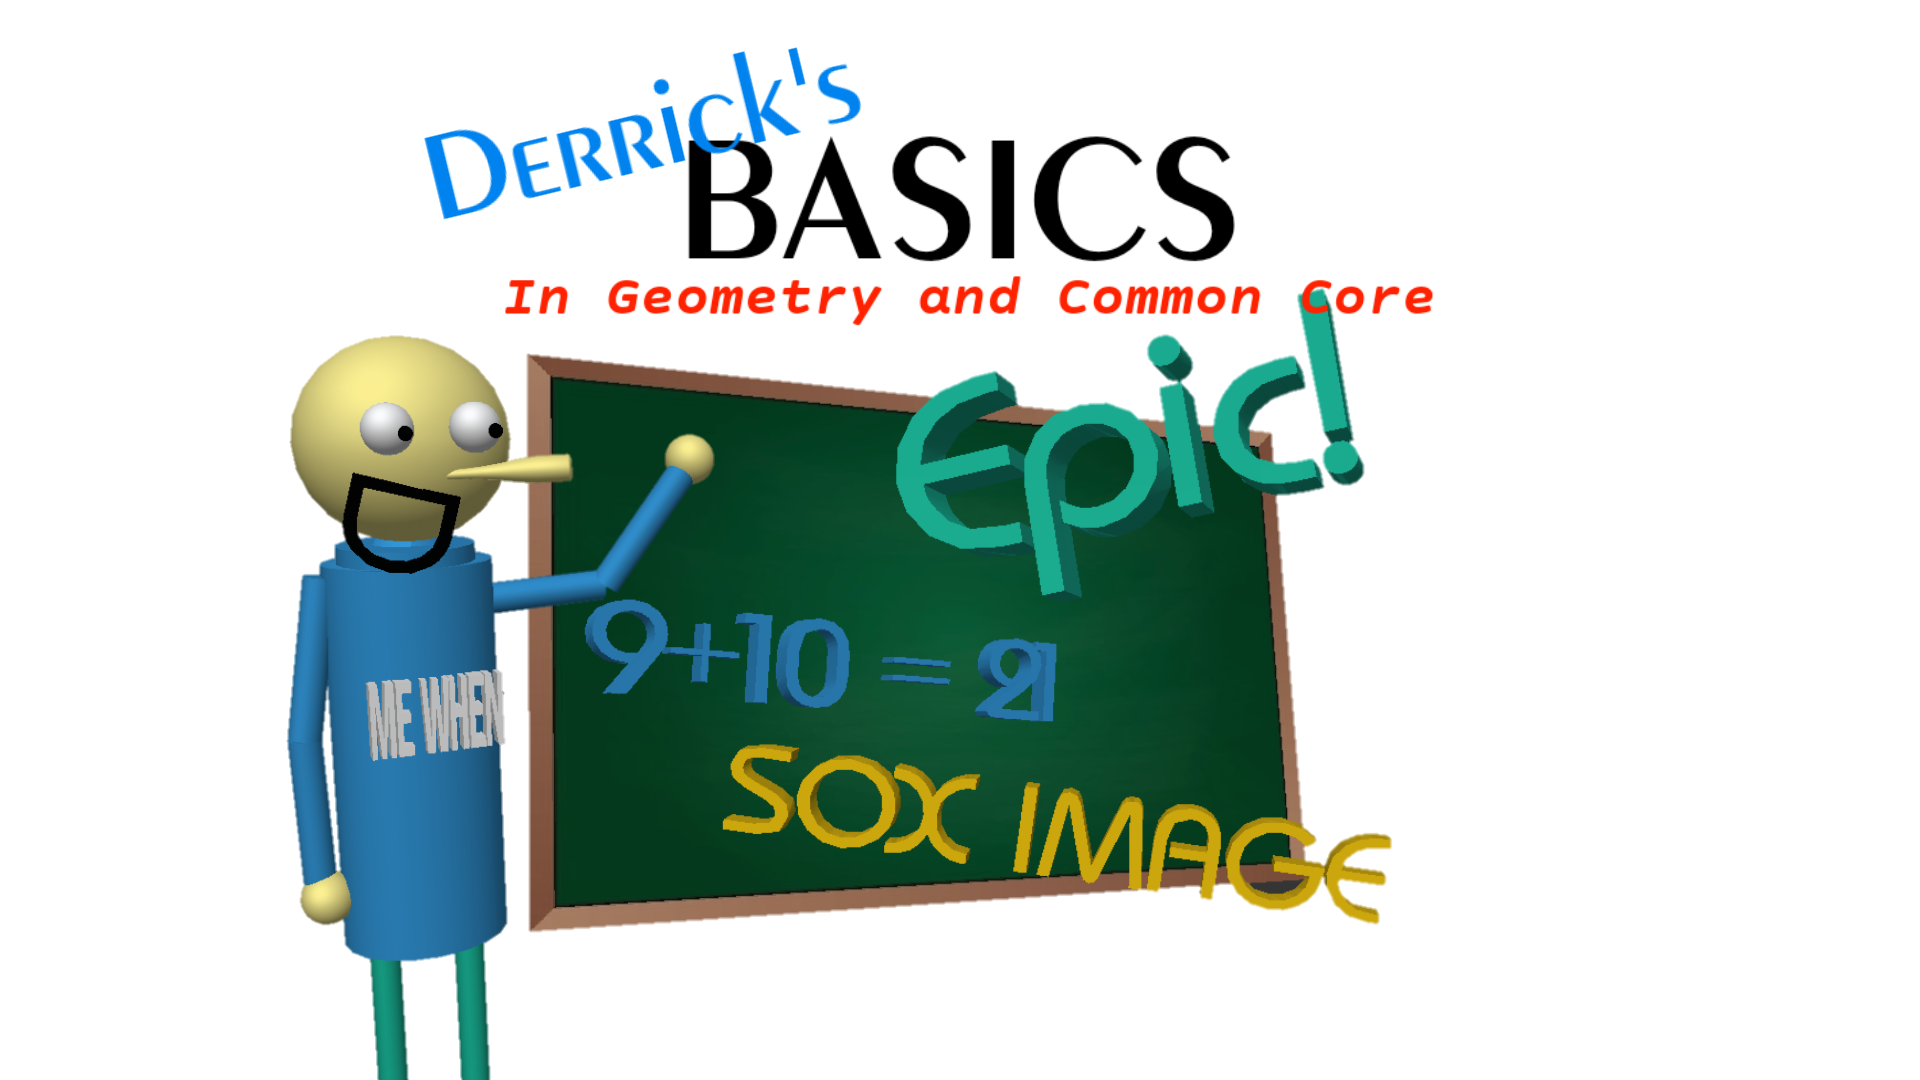 Derrick's Basics in Geometry And Common Core (Demo)